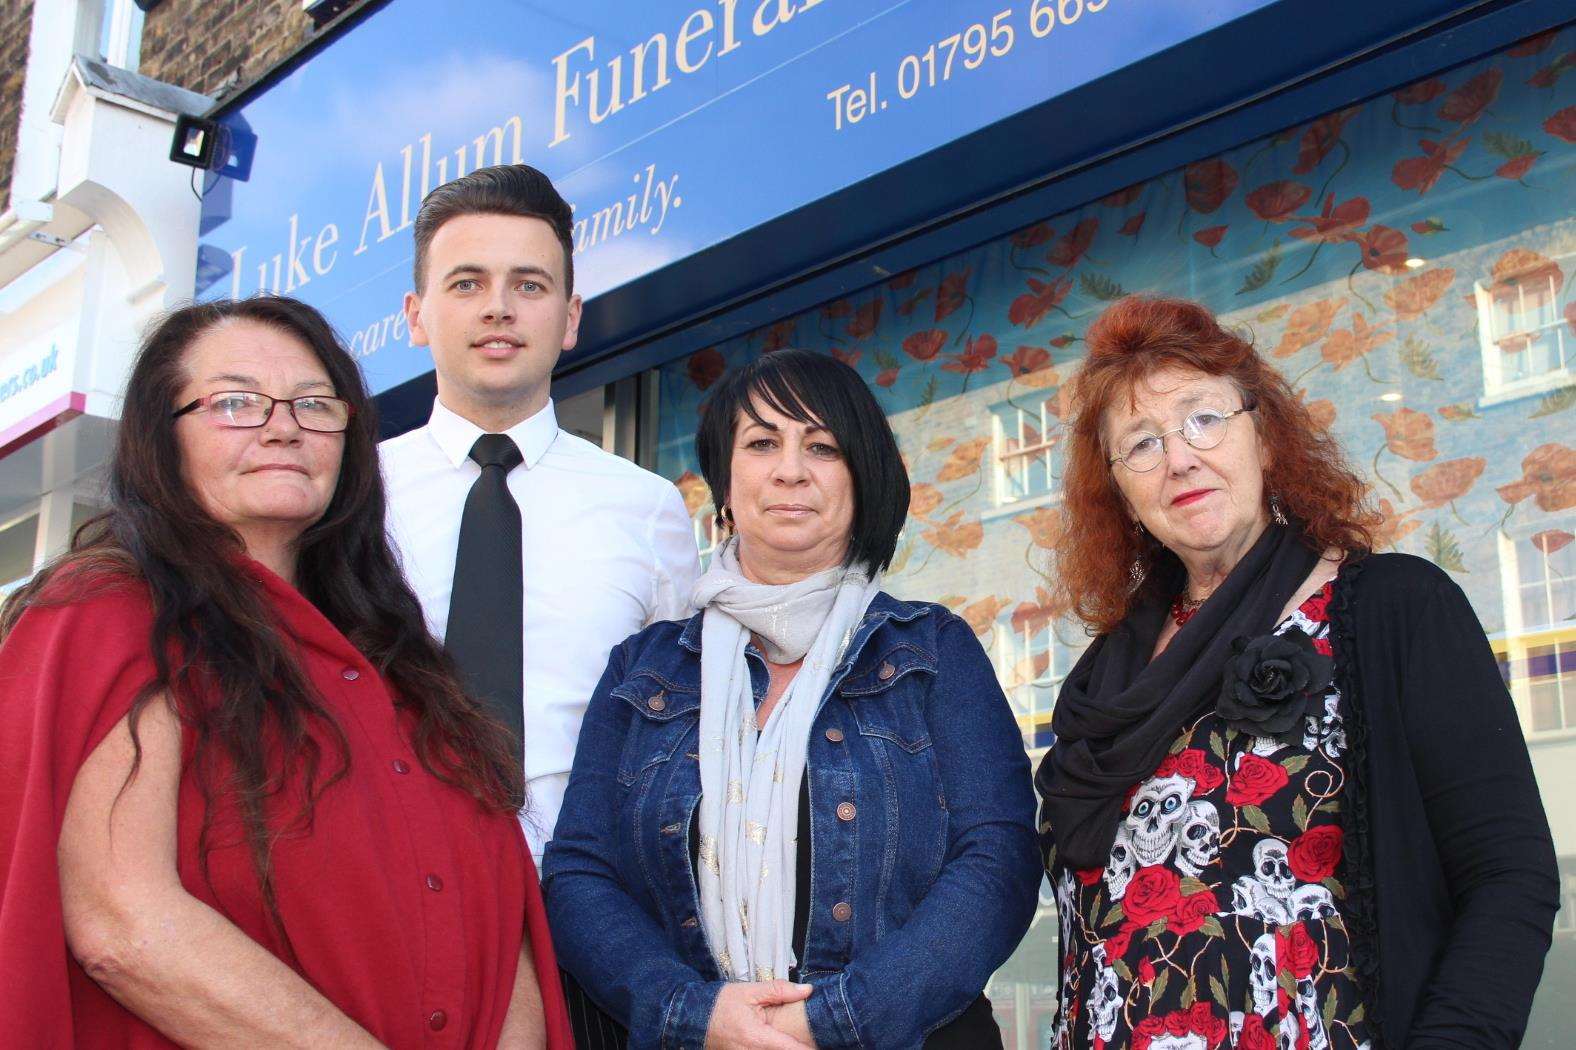 Sheppey funeral director Luke Allum has come to the rescue, pictured with Anne McManus' friend Vivienne Hudson, left, neighbour Chris Reed, right, and Tracy Jackson from Seabreeze caravan park